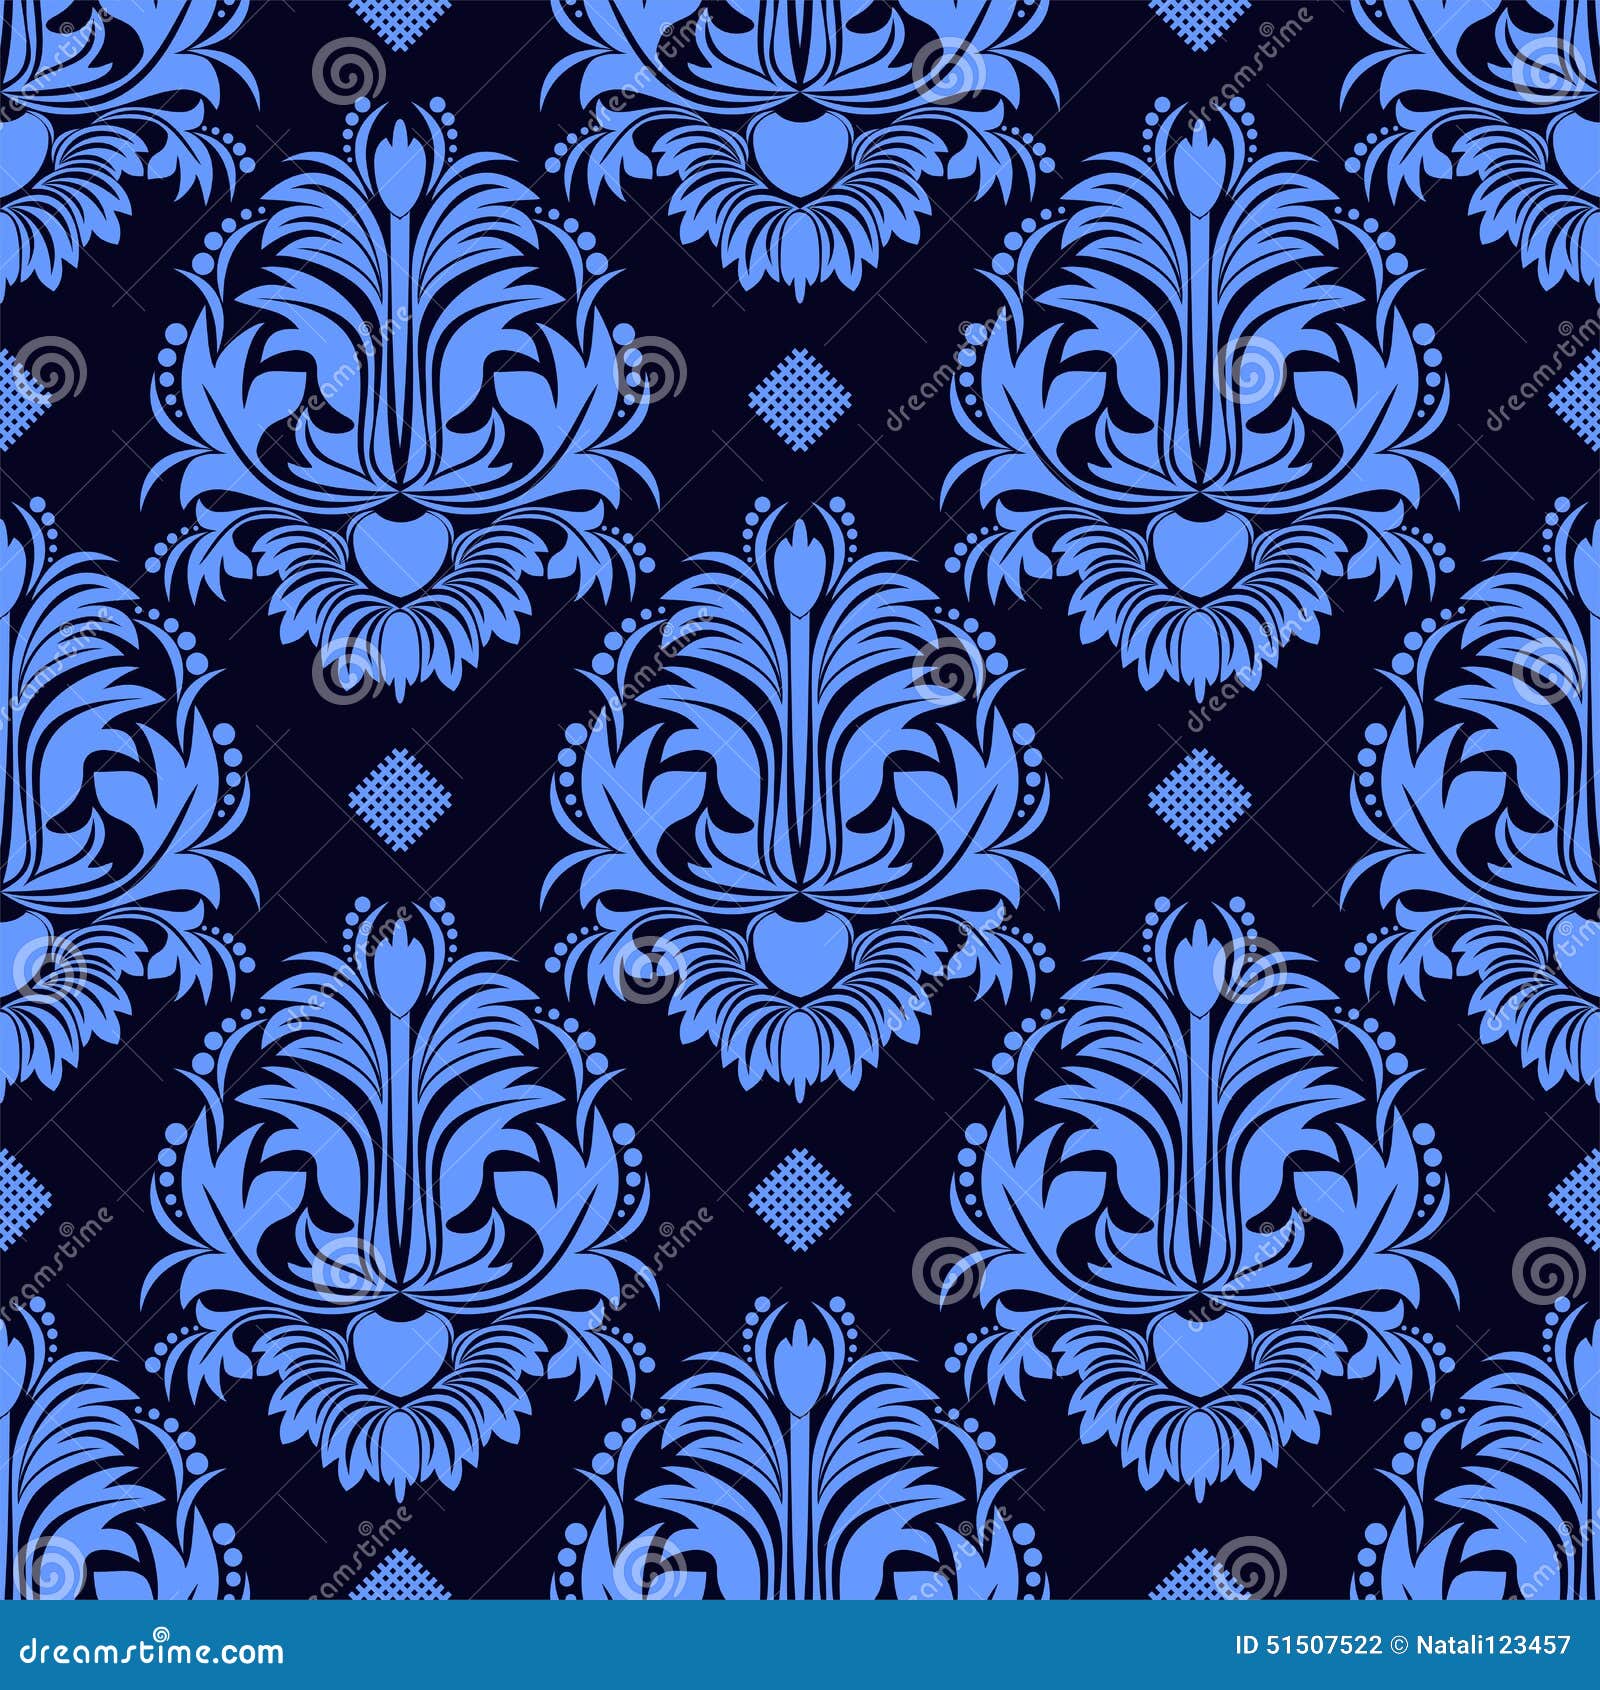 Seamless Floral Damask Wallpaper in Blue Colors Stock Vector ...